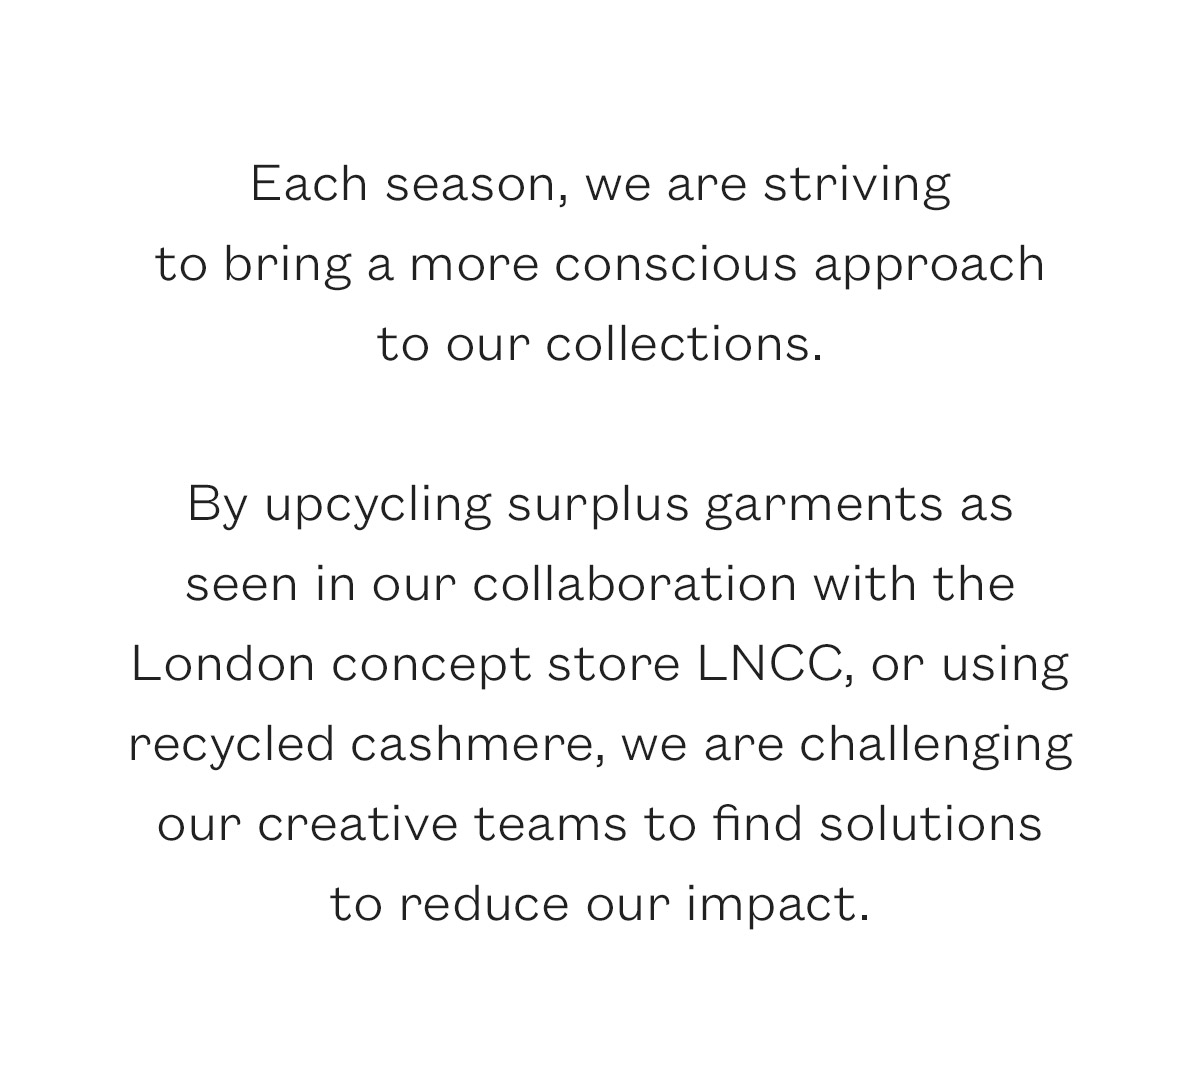 Each season, we are striving to bring a more conscious approach to our collections.   By upcycling surplus garments as seen in our collaboration with the  London concept store LNCC, or using recycled cashmere, we are challenging  our creative teams to find solutions  to reduce our impact.